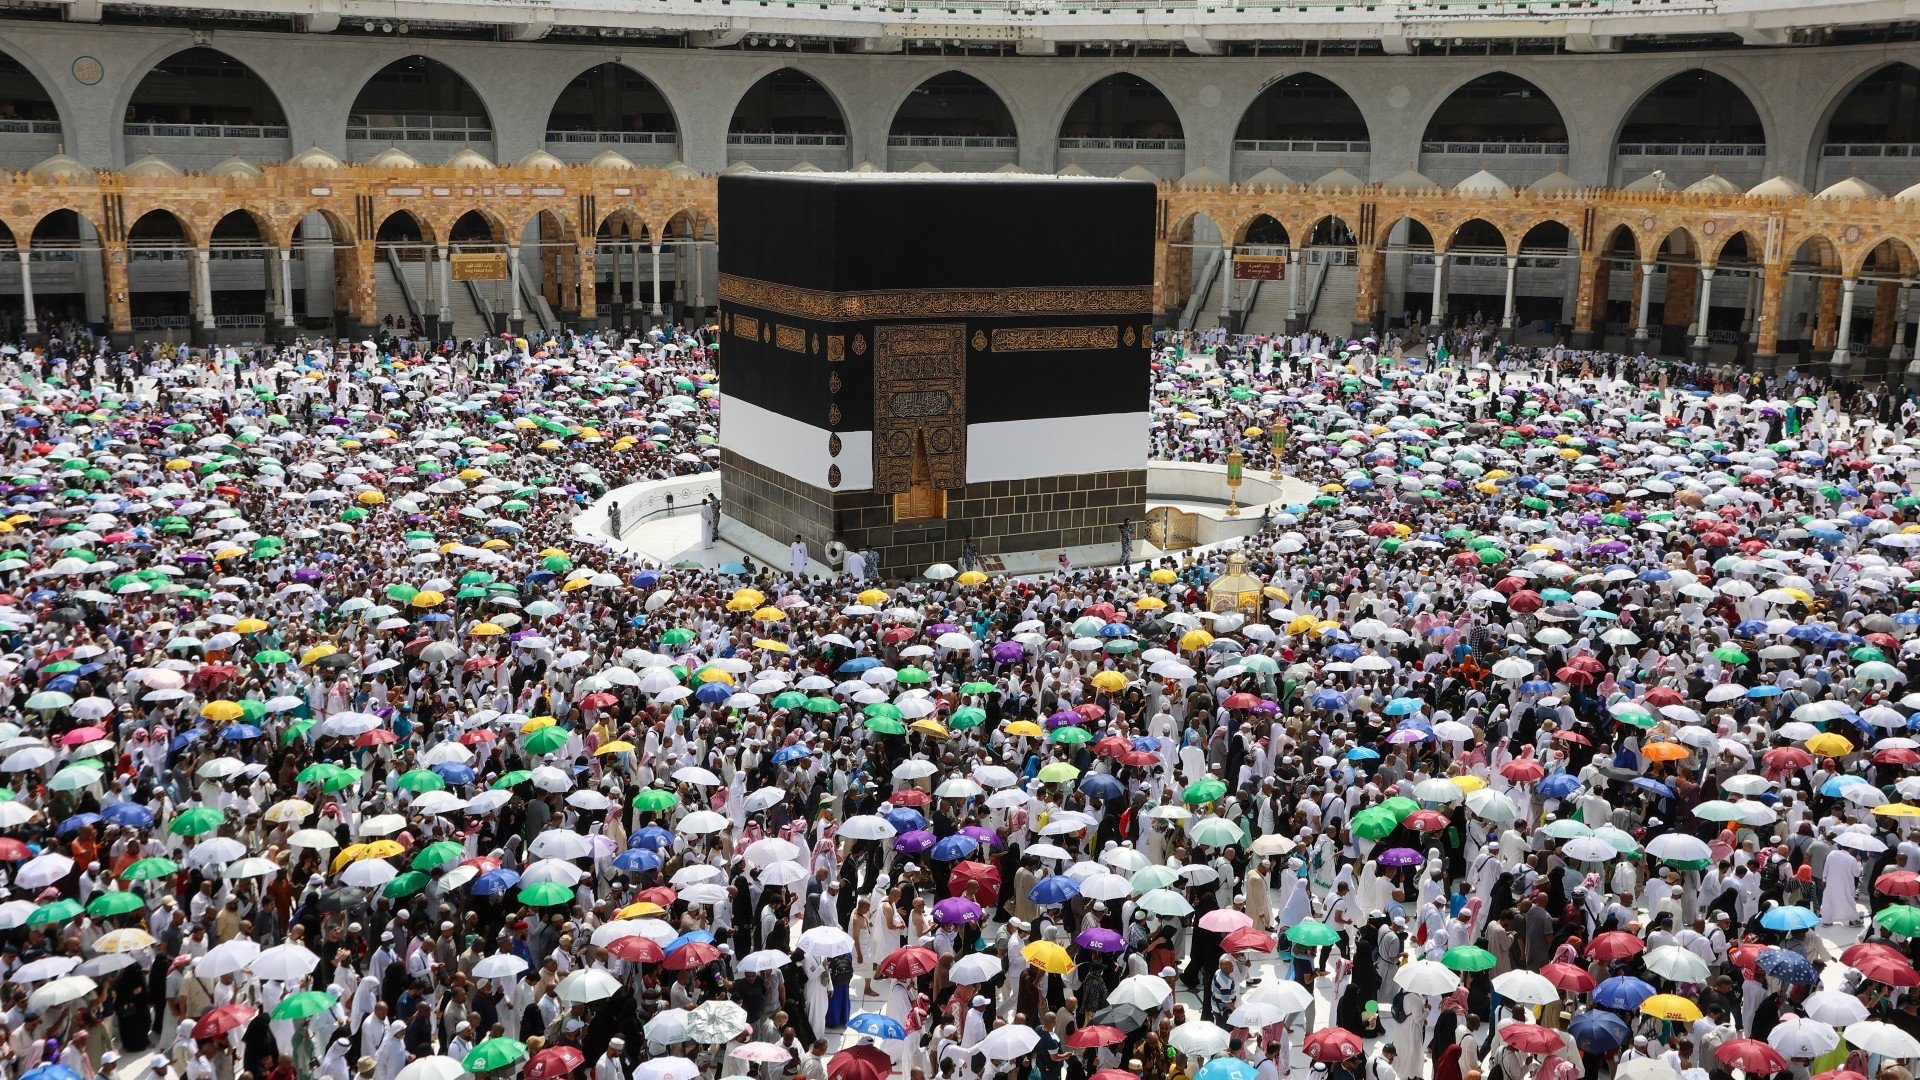 Nearly 780,000 pilgrims from abroad attended this year's Hajj, according to Saudi officials (AFP)